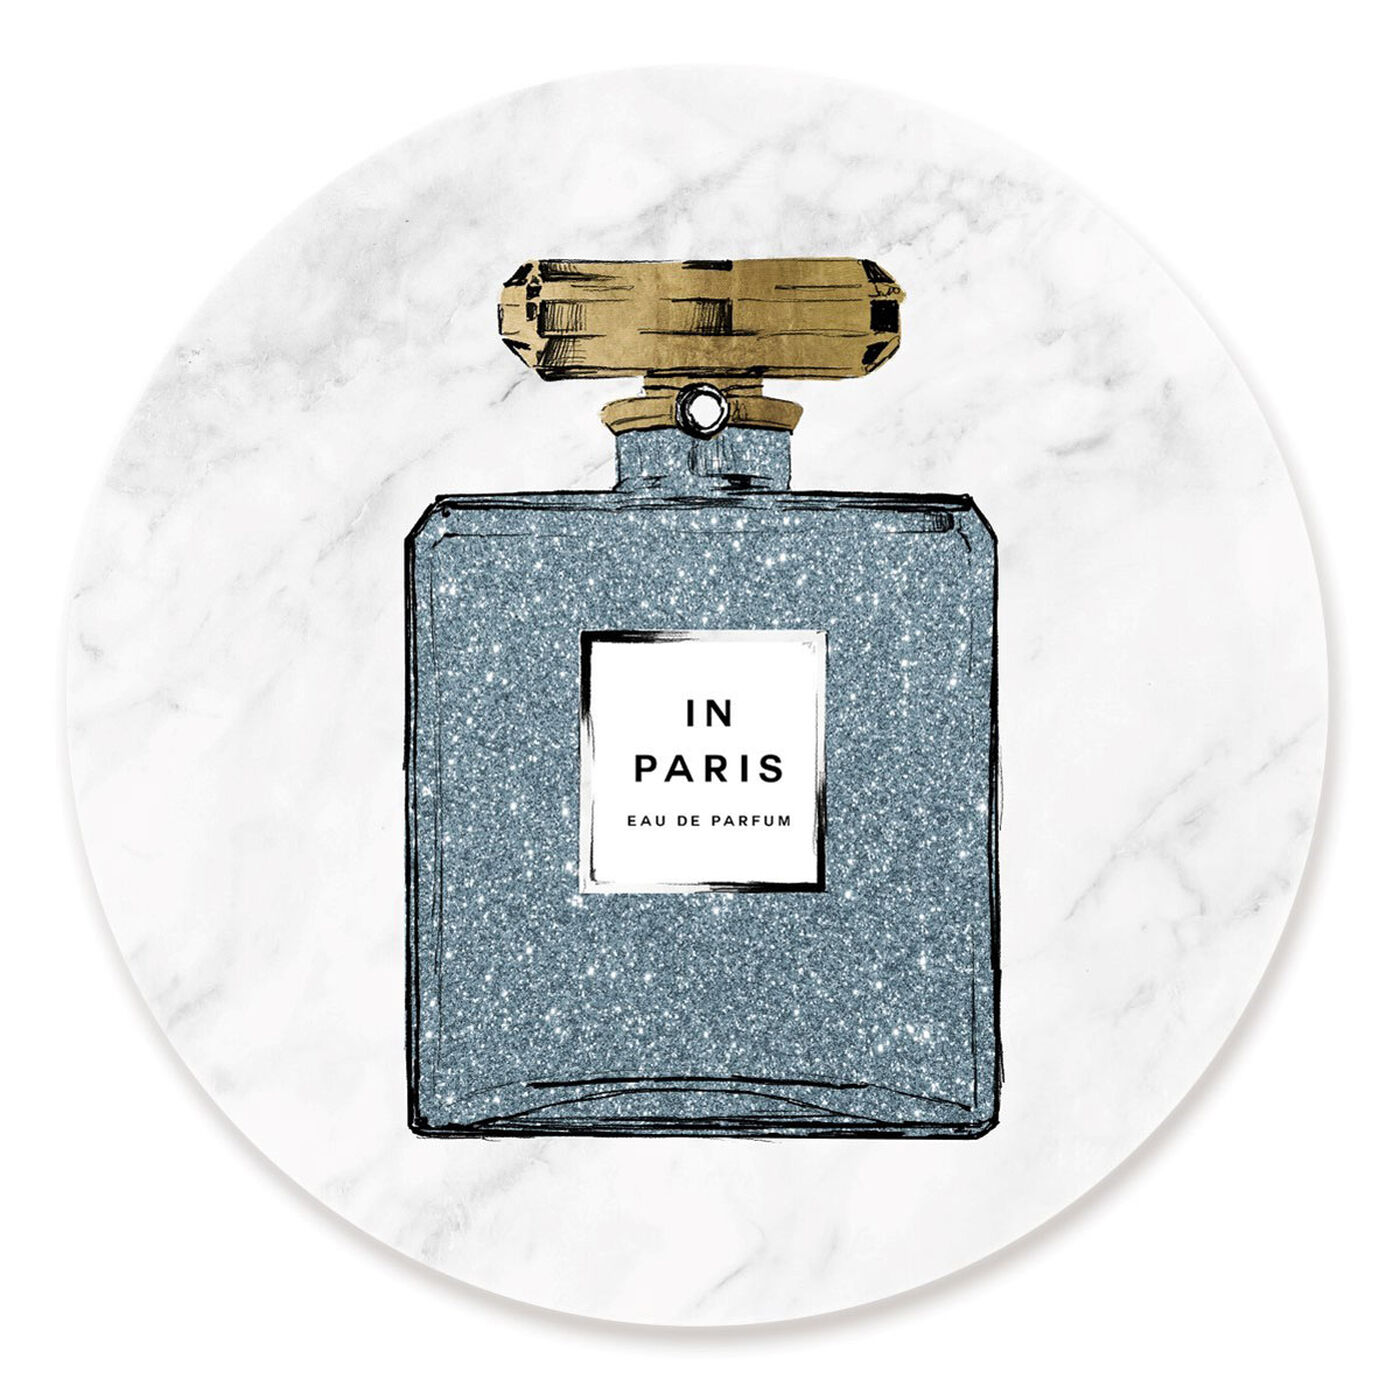 Men Perfume Monsieur Bleu  Fashion and Glam Wall Art by The Oliver Gal